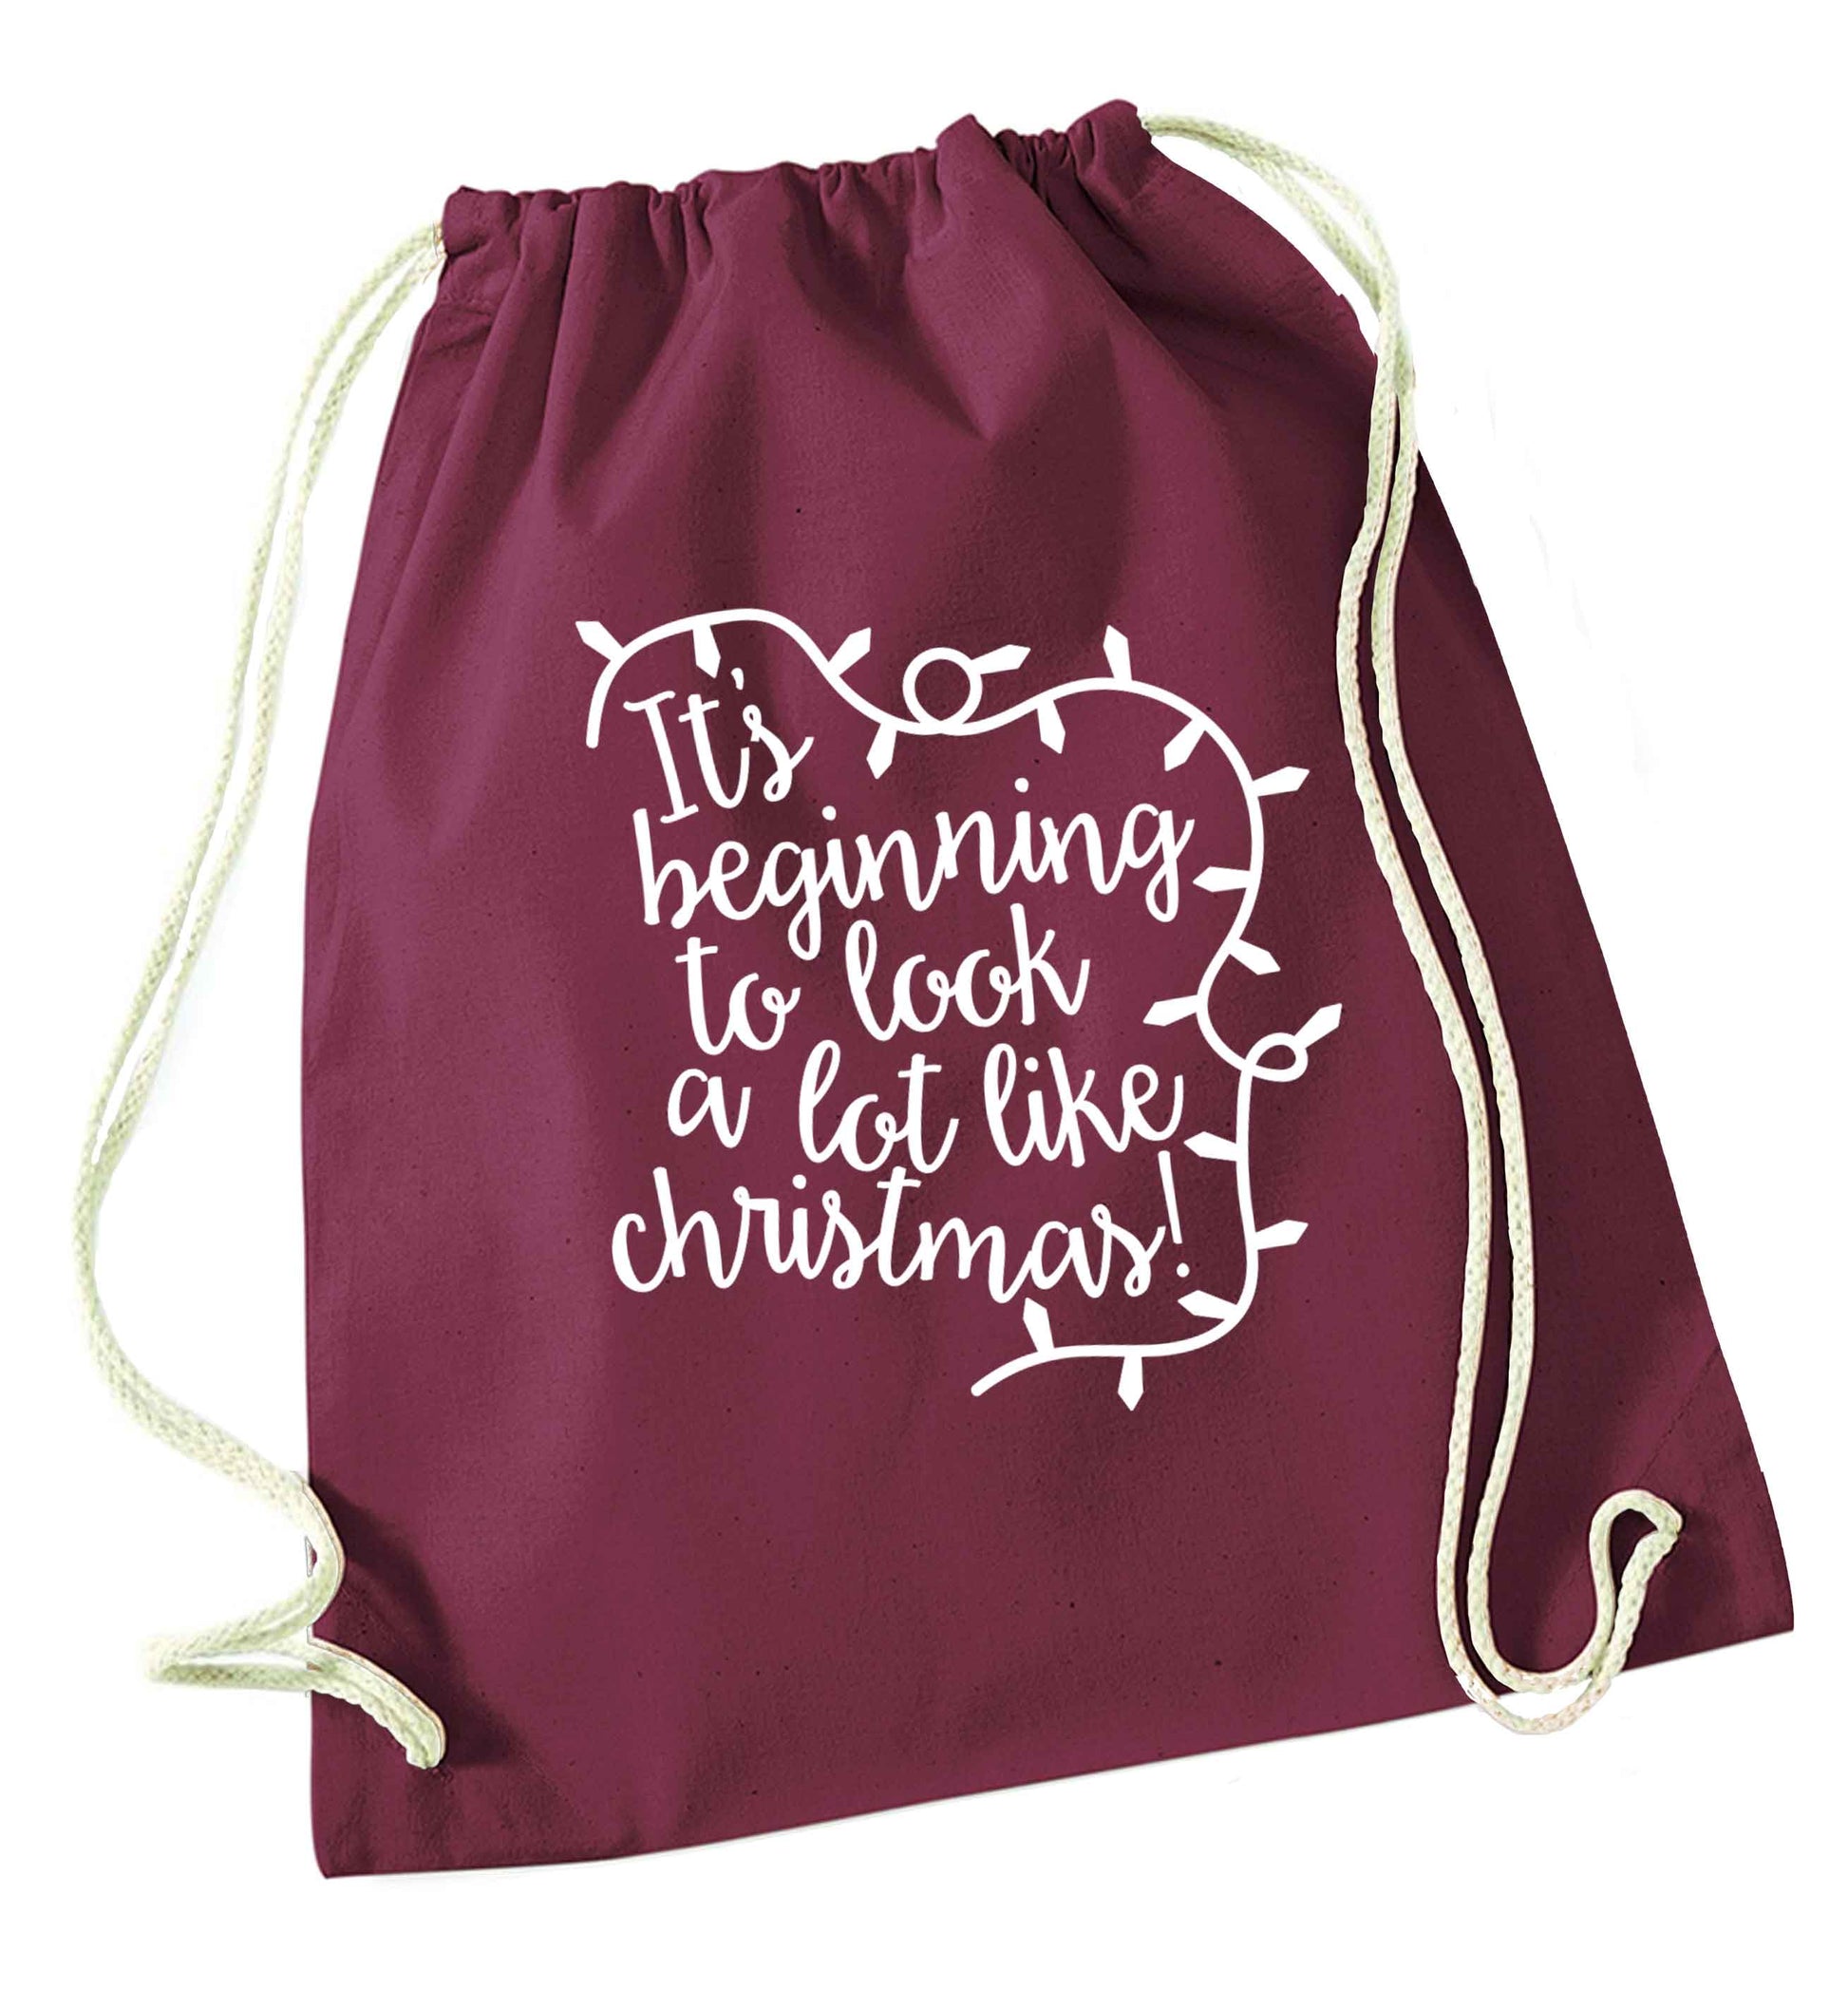 It's beginning to look a lot like Christmas maroon drawstring bag